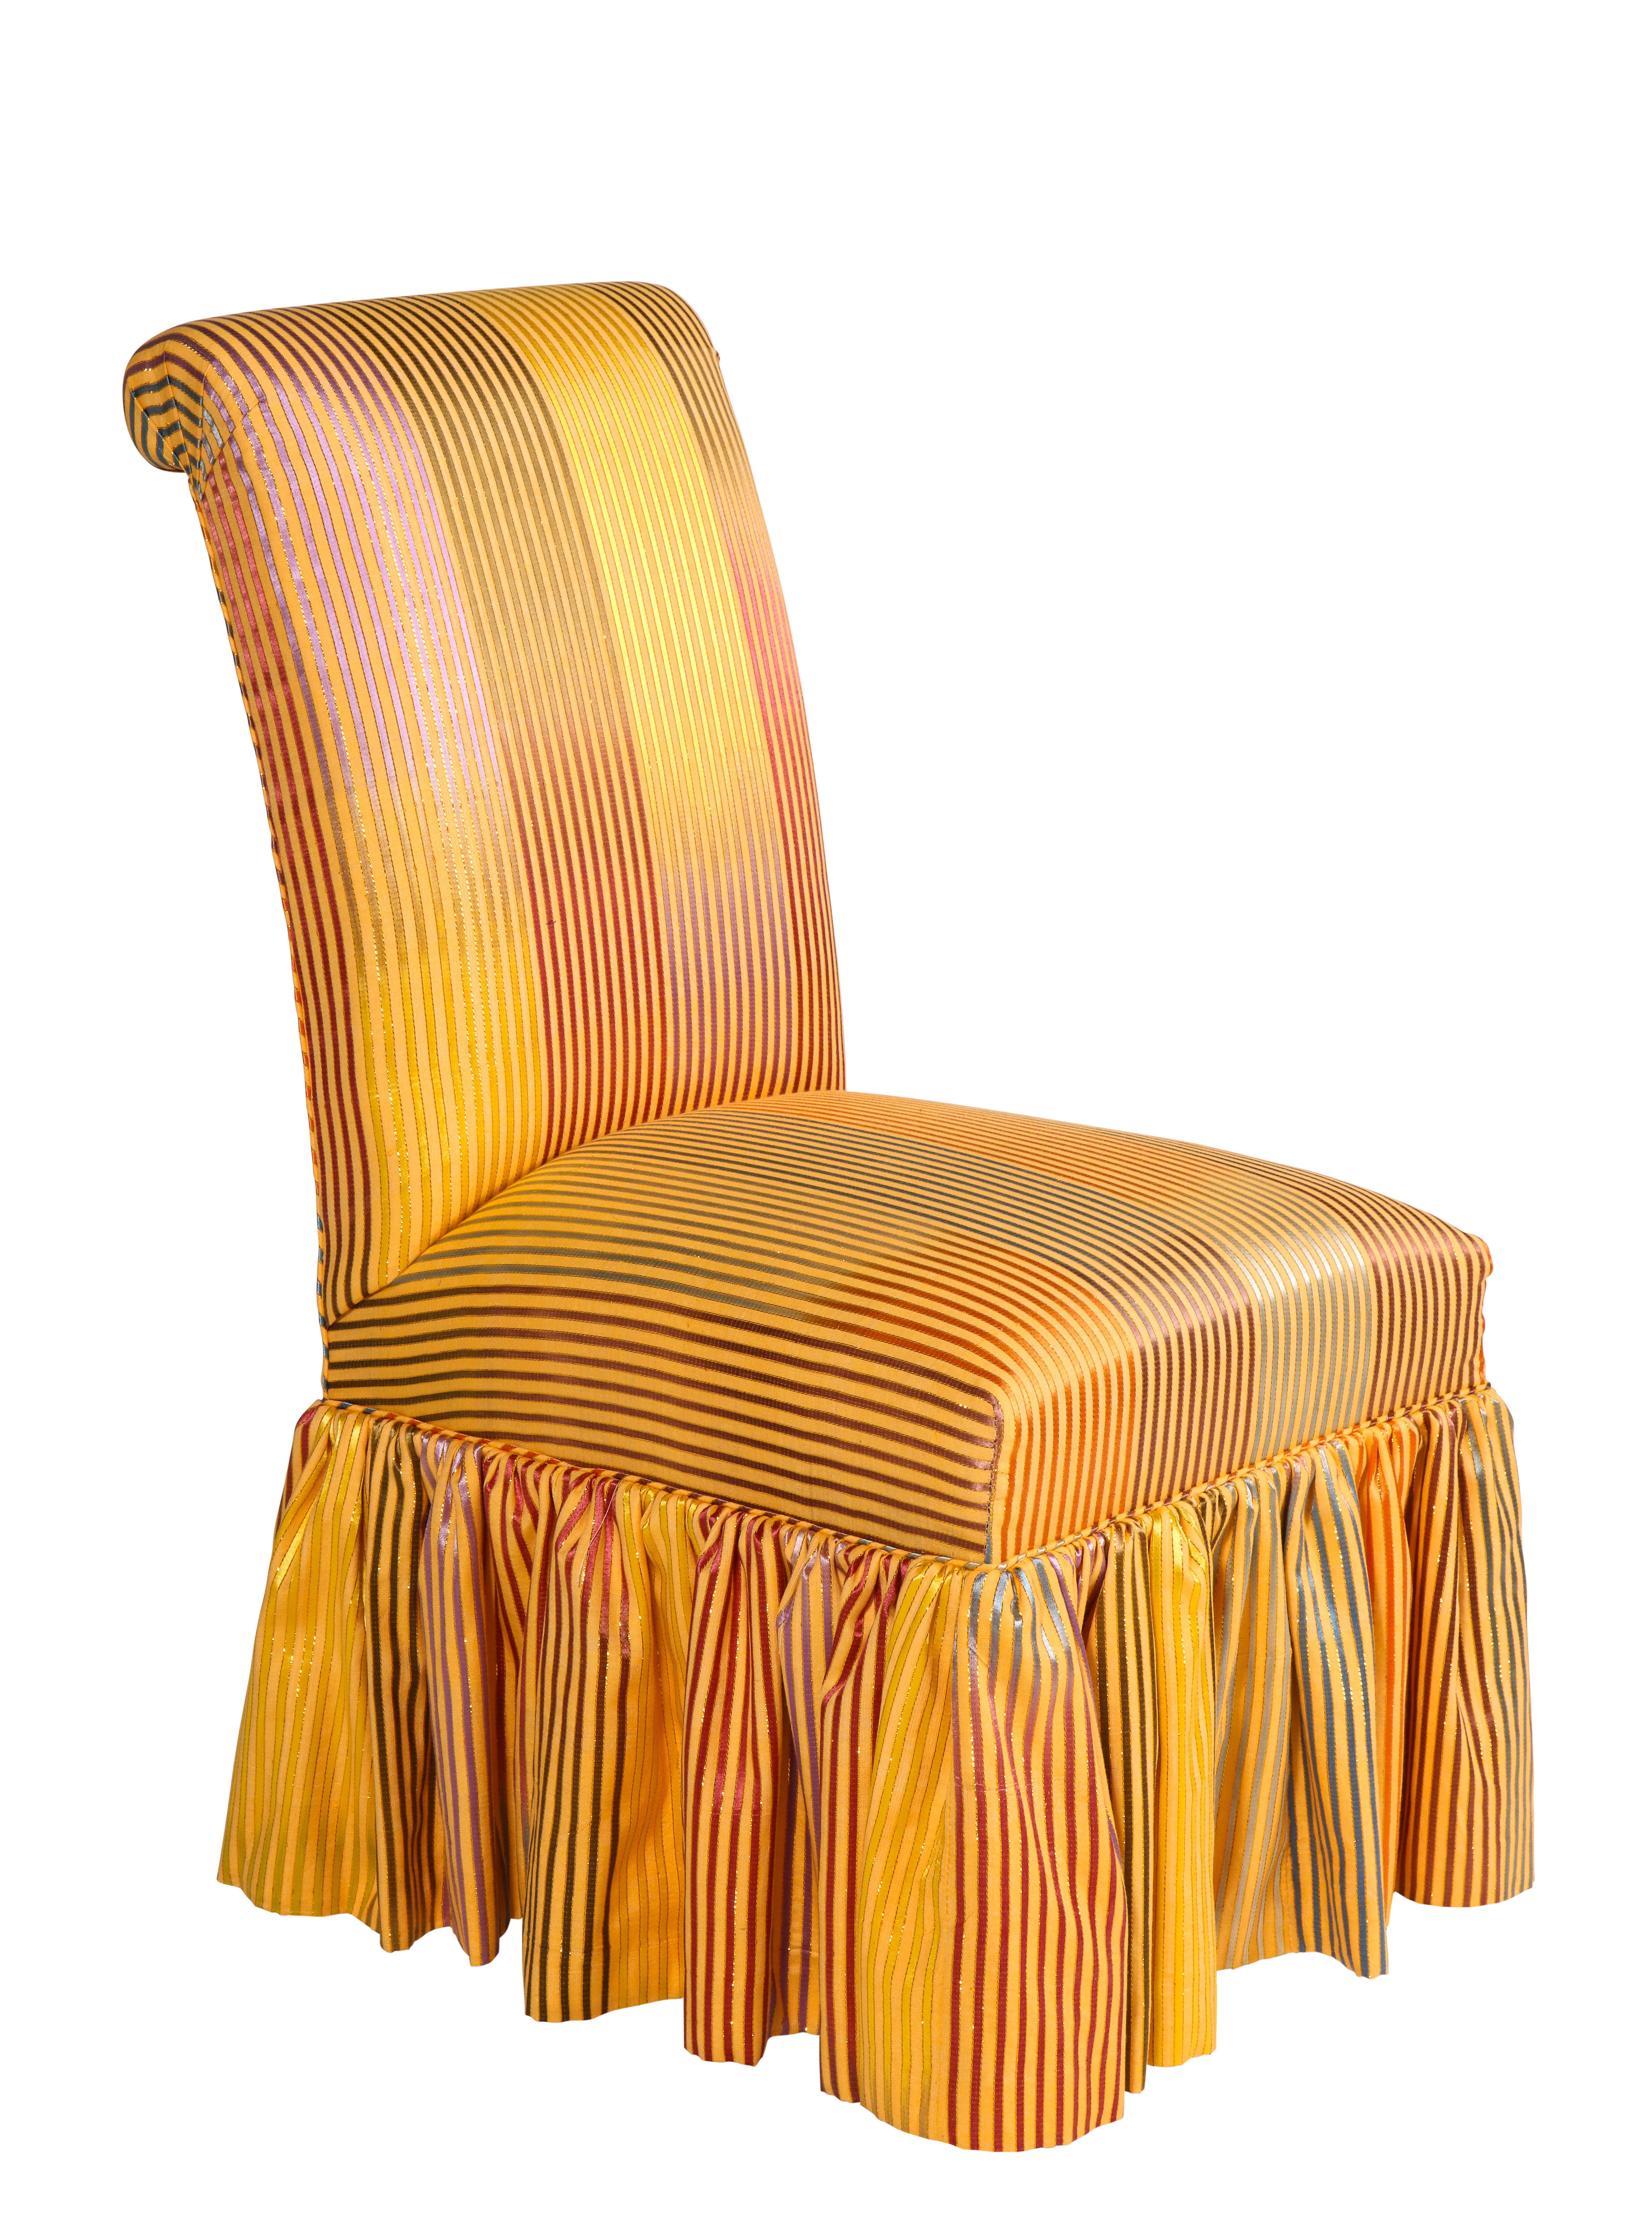 20th Century Skirted Side Chair with Metallic Iridescent Stripes For Sale